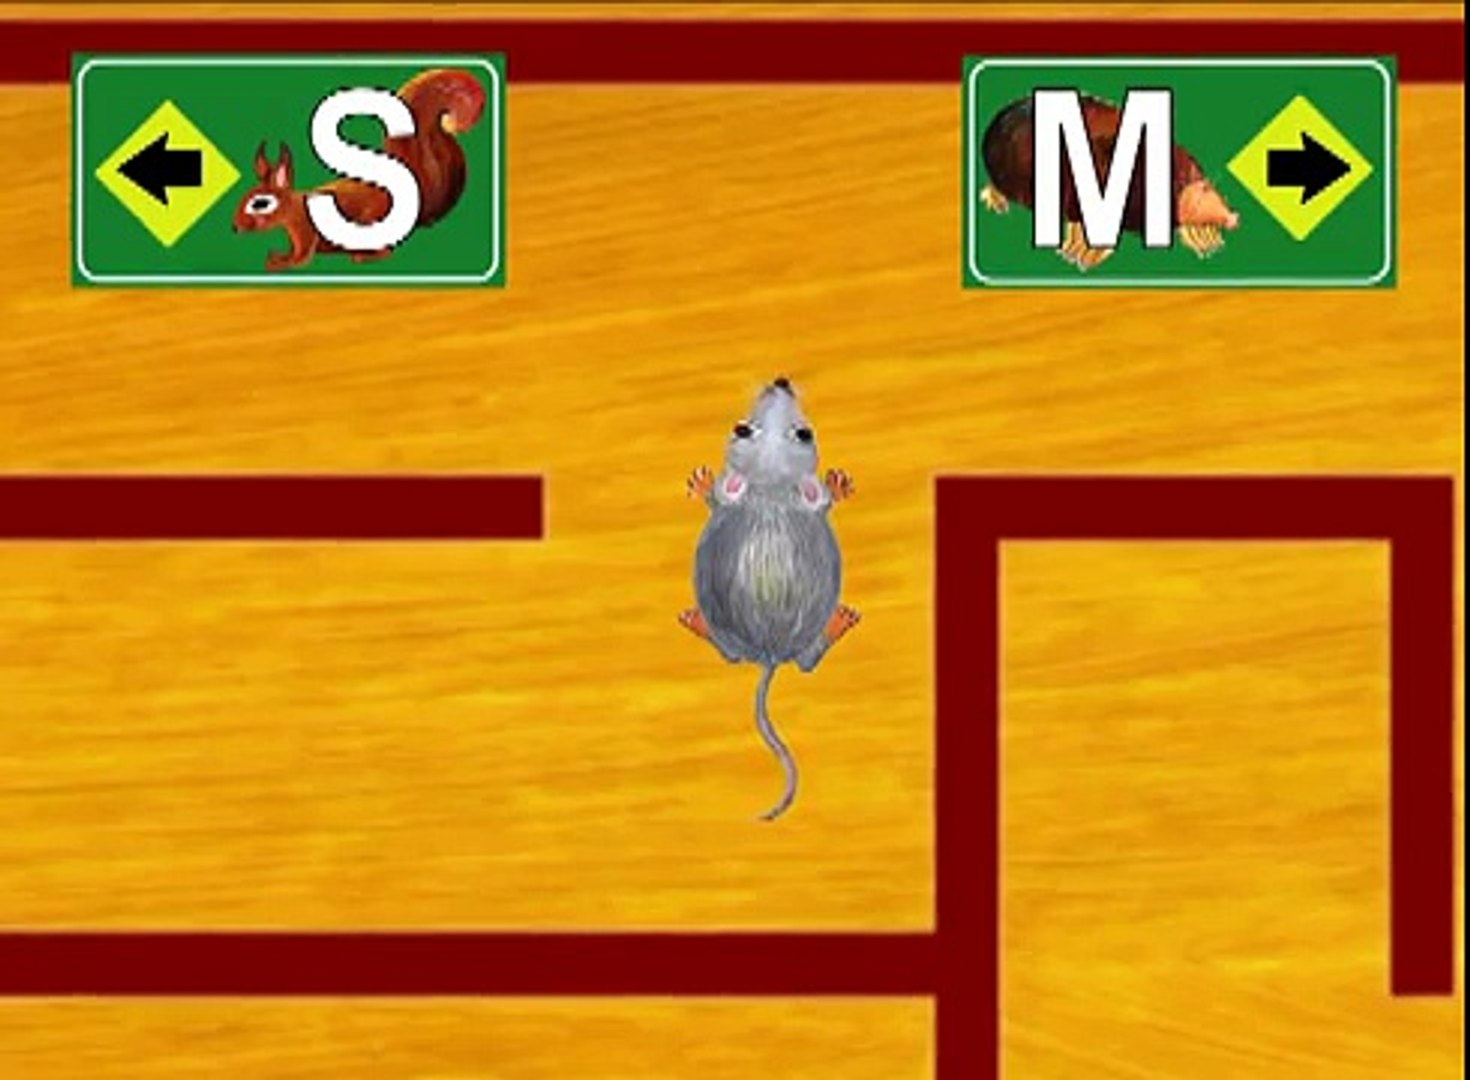 The Letter M Song By Abcmouse.Com - Video Dailymotion